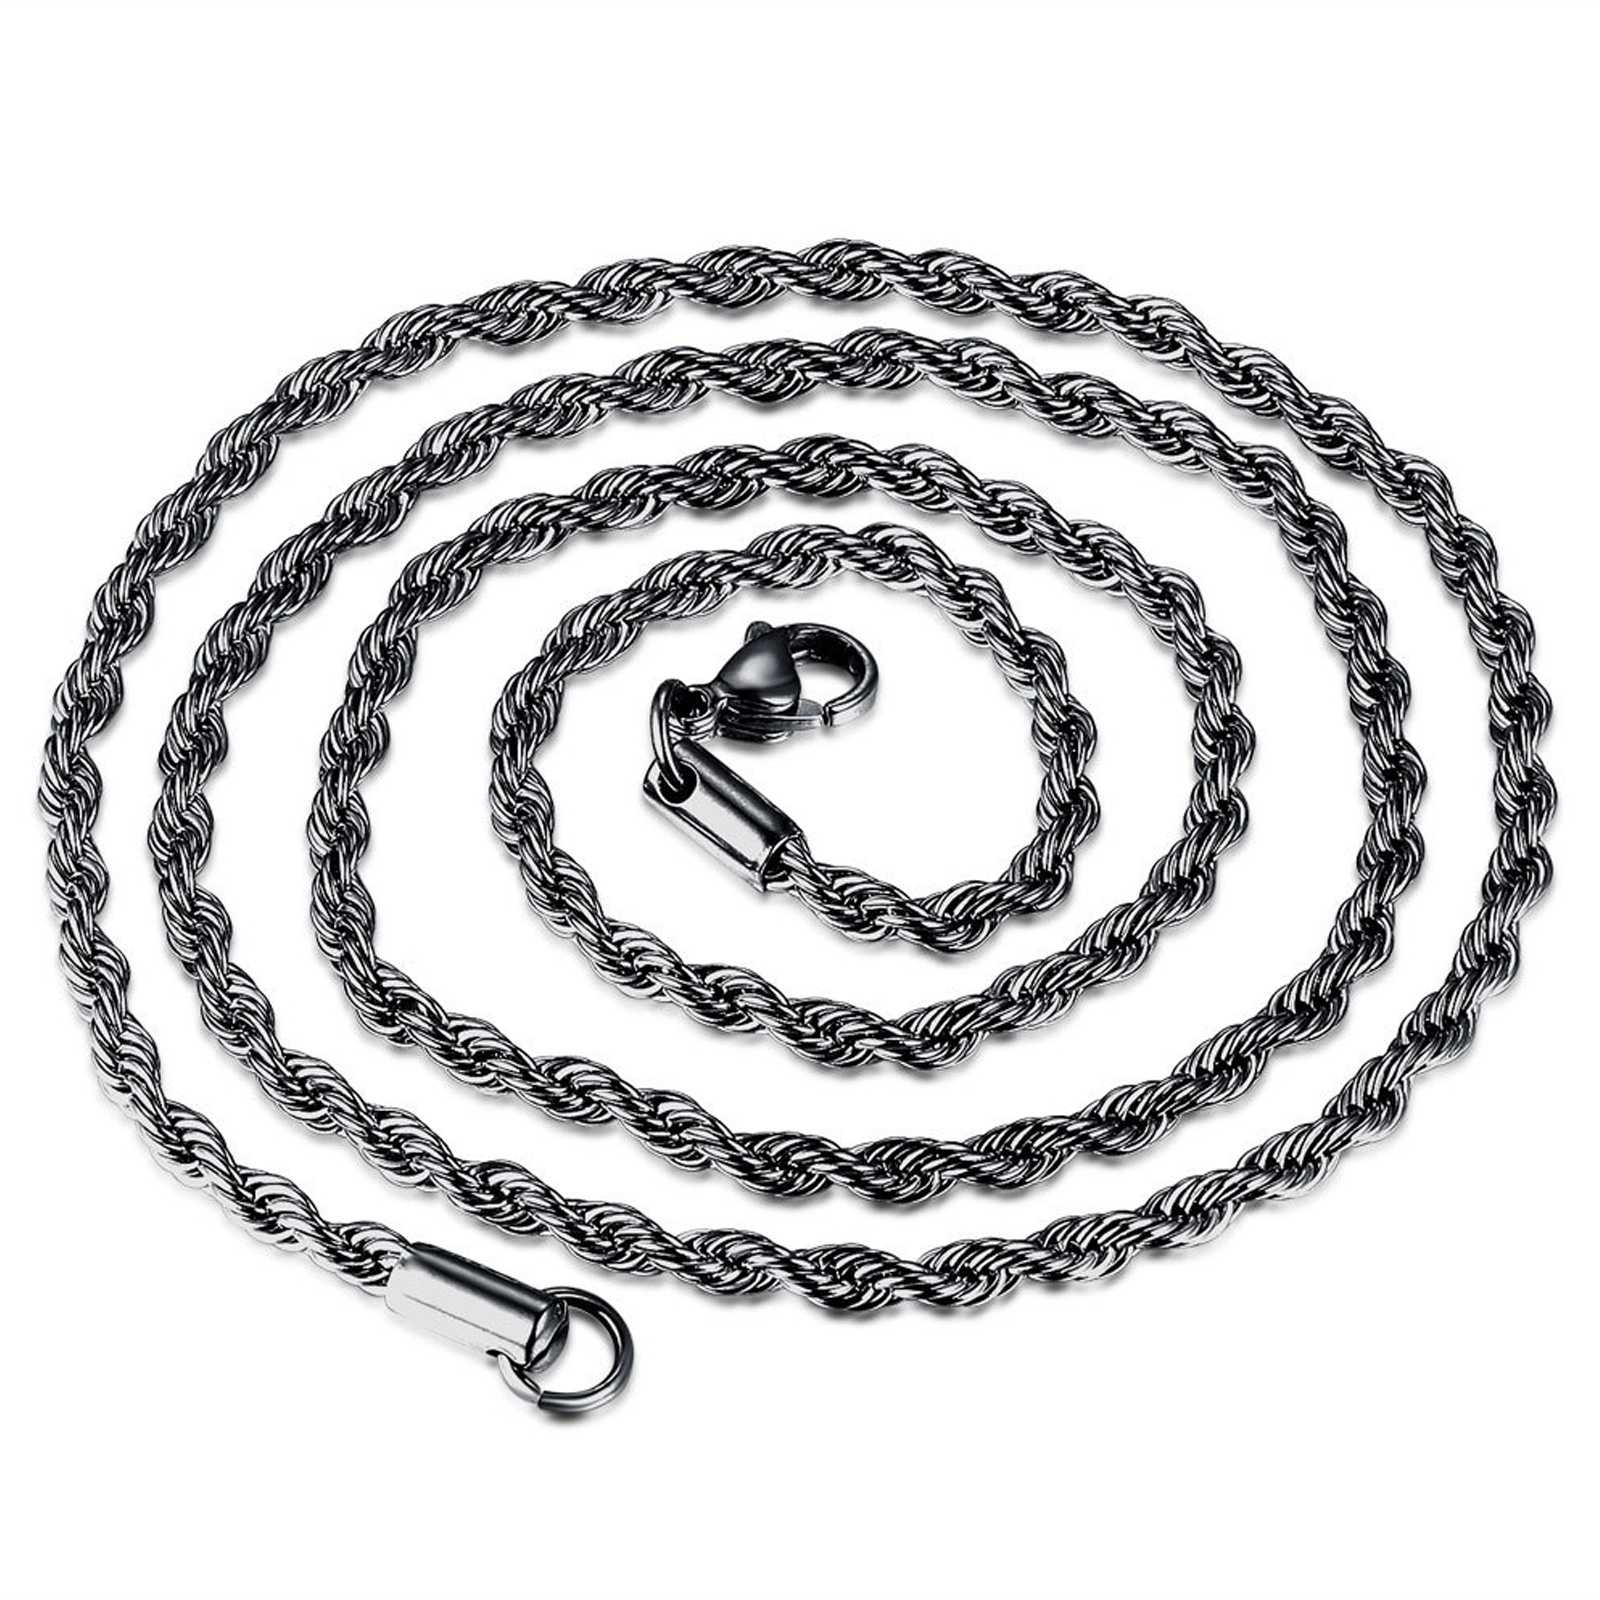 Picture of Stainless Steel Braided Rope Chain Necklace Gunmetal 51cm(20 1/8") long, 1 Piece